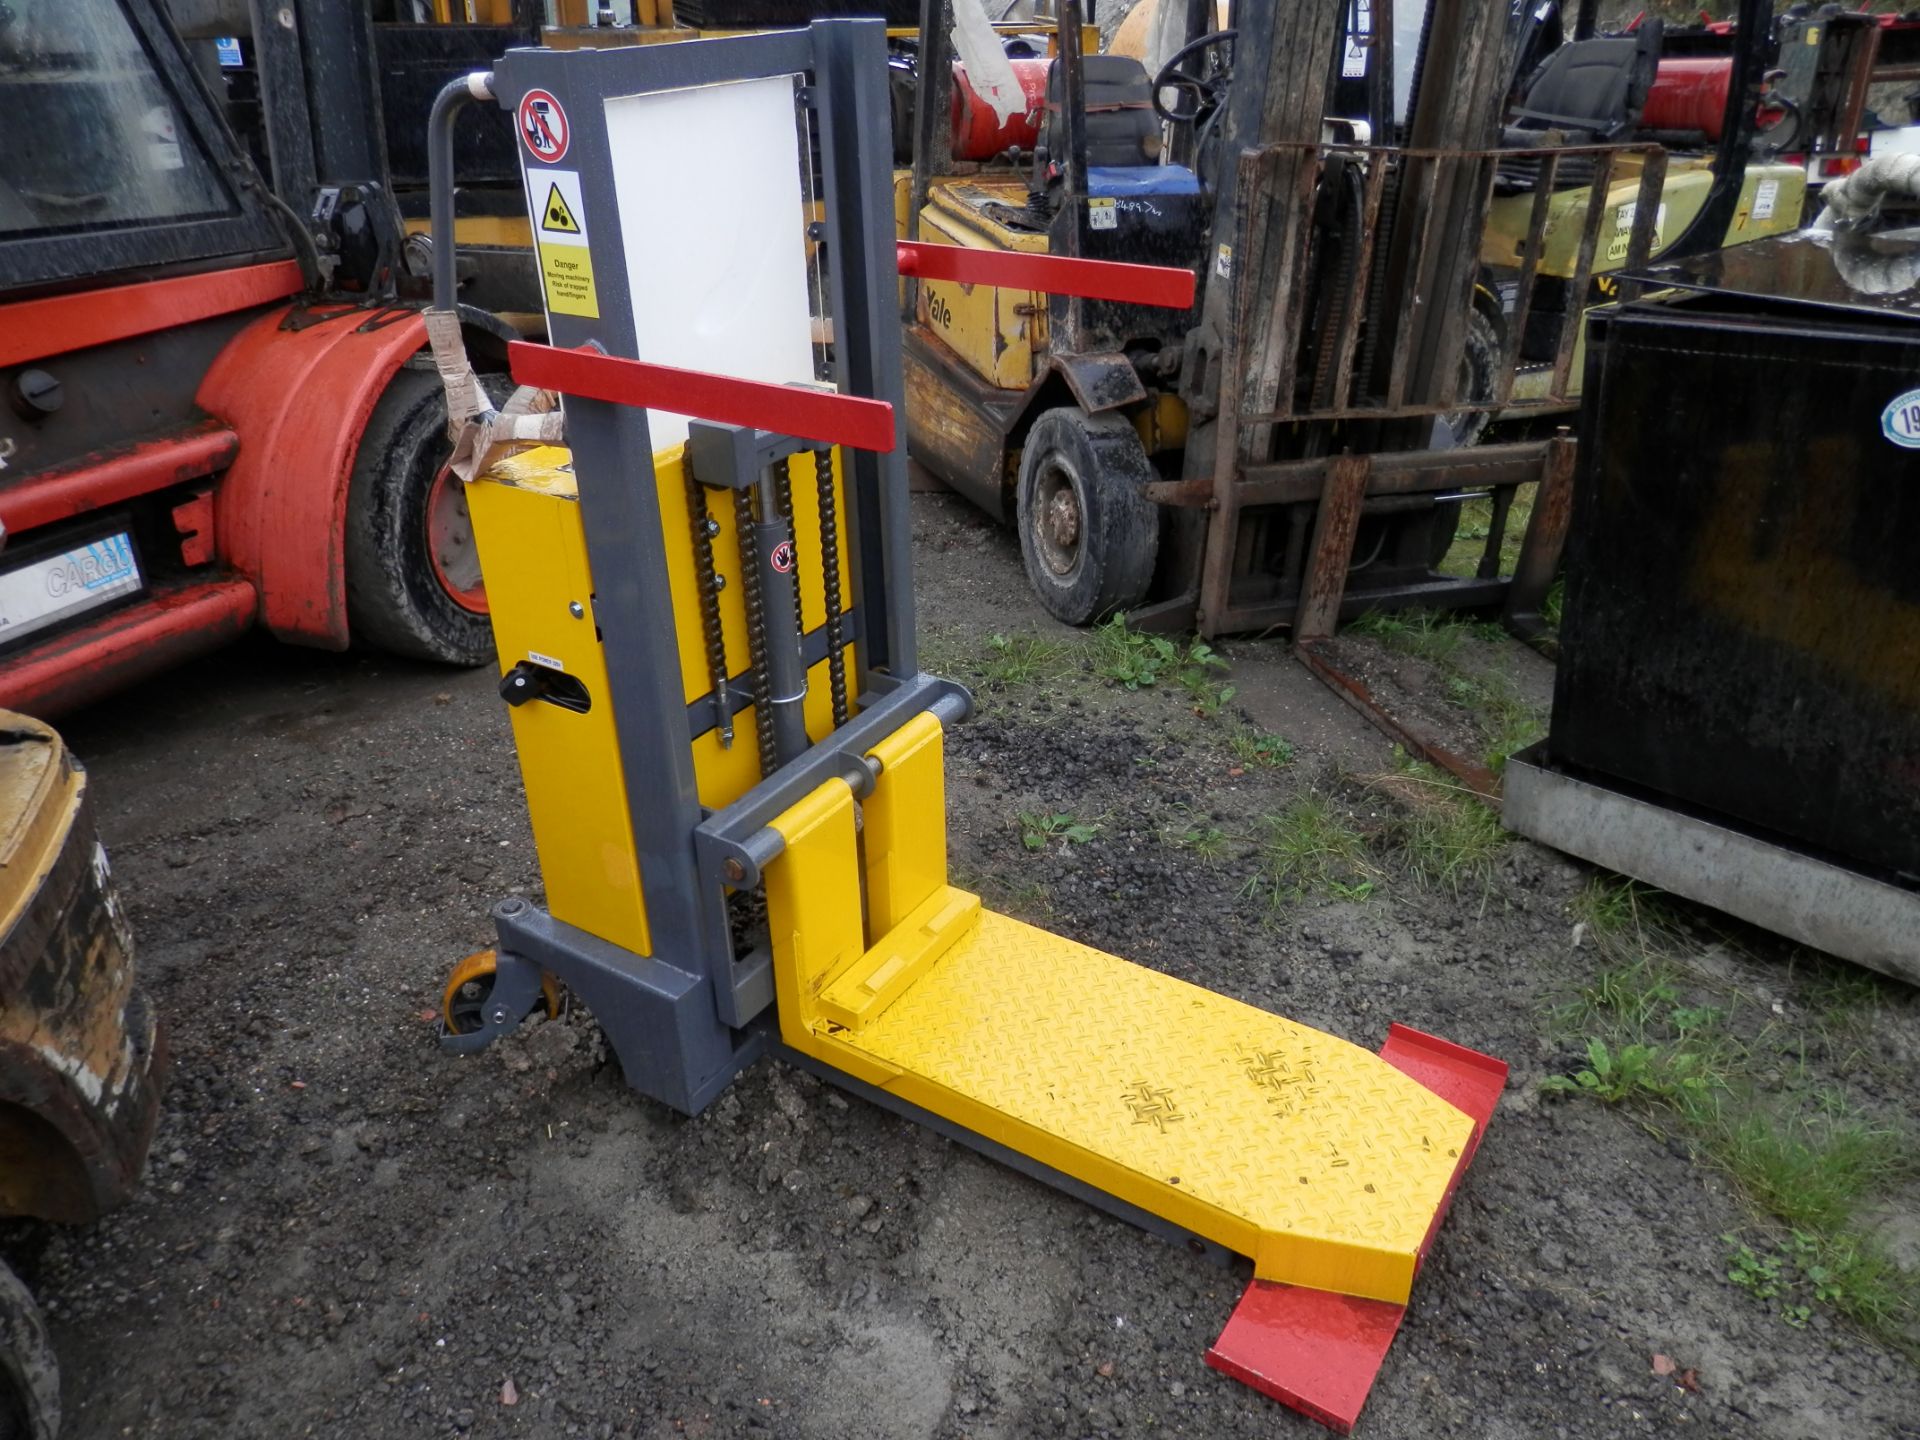 NEW WARRIOR 12V ELECTRIC PALLET TRUCK, 5 AVAILABLE. 250KG LIFT CAPACITY, 1000MM. (2 OF 5)